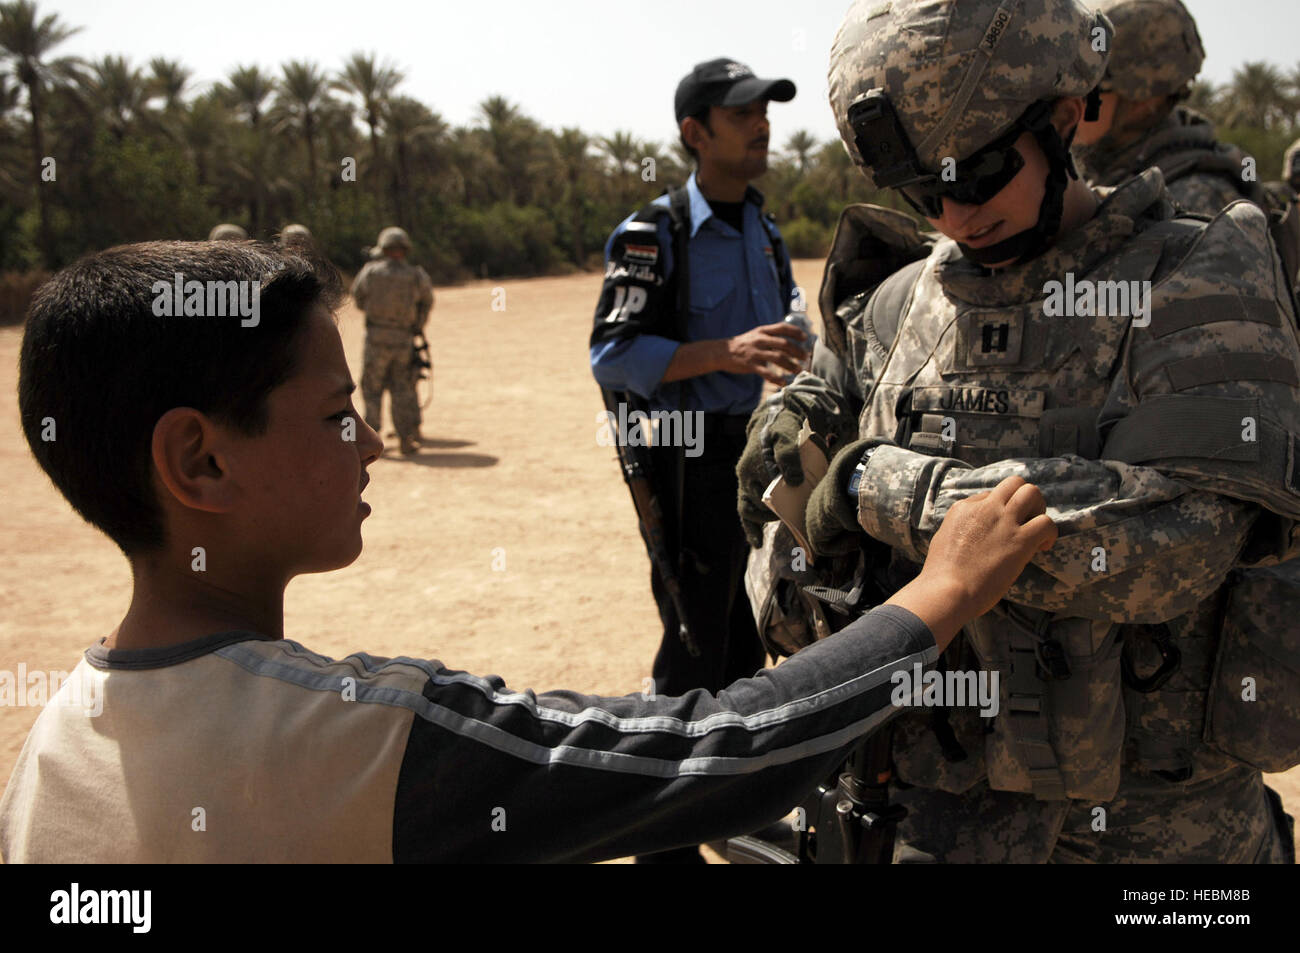 U.S. Army Capt. Norma James, commander of the 411th Military Police Company, 716th Military Police Battalion, 101st Airborne Division, interacts with a local boy in Abayachi, Iraq, March 30, 2008. (U.S. Air Force photo by Tech. Sgt. William Greer) (Released) Stock Photo